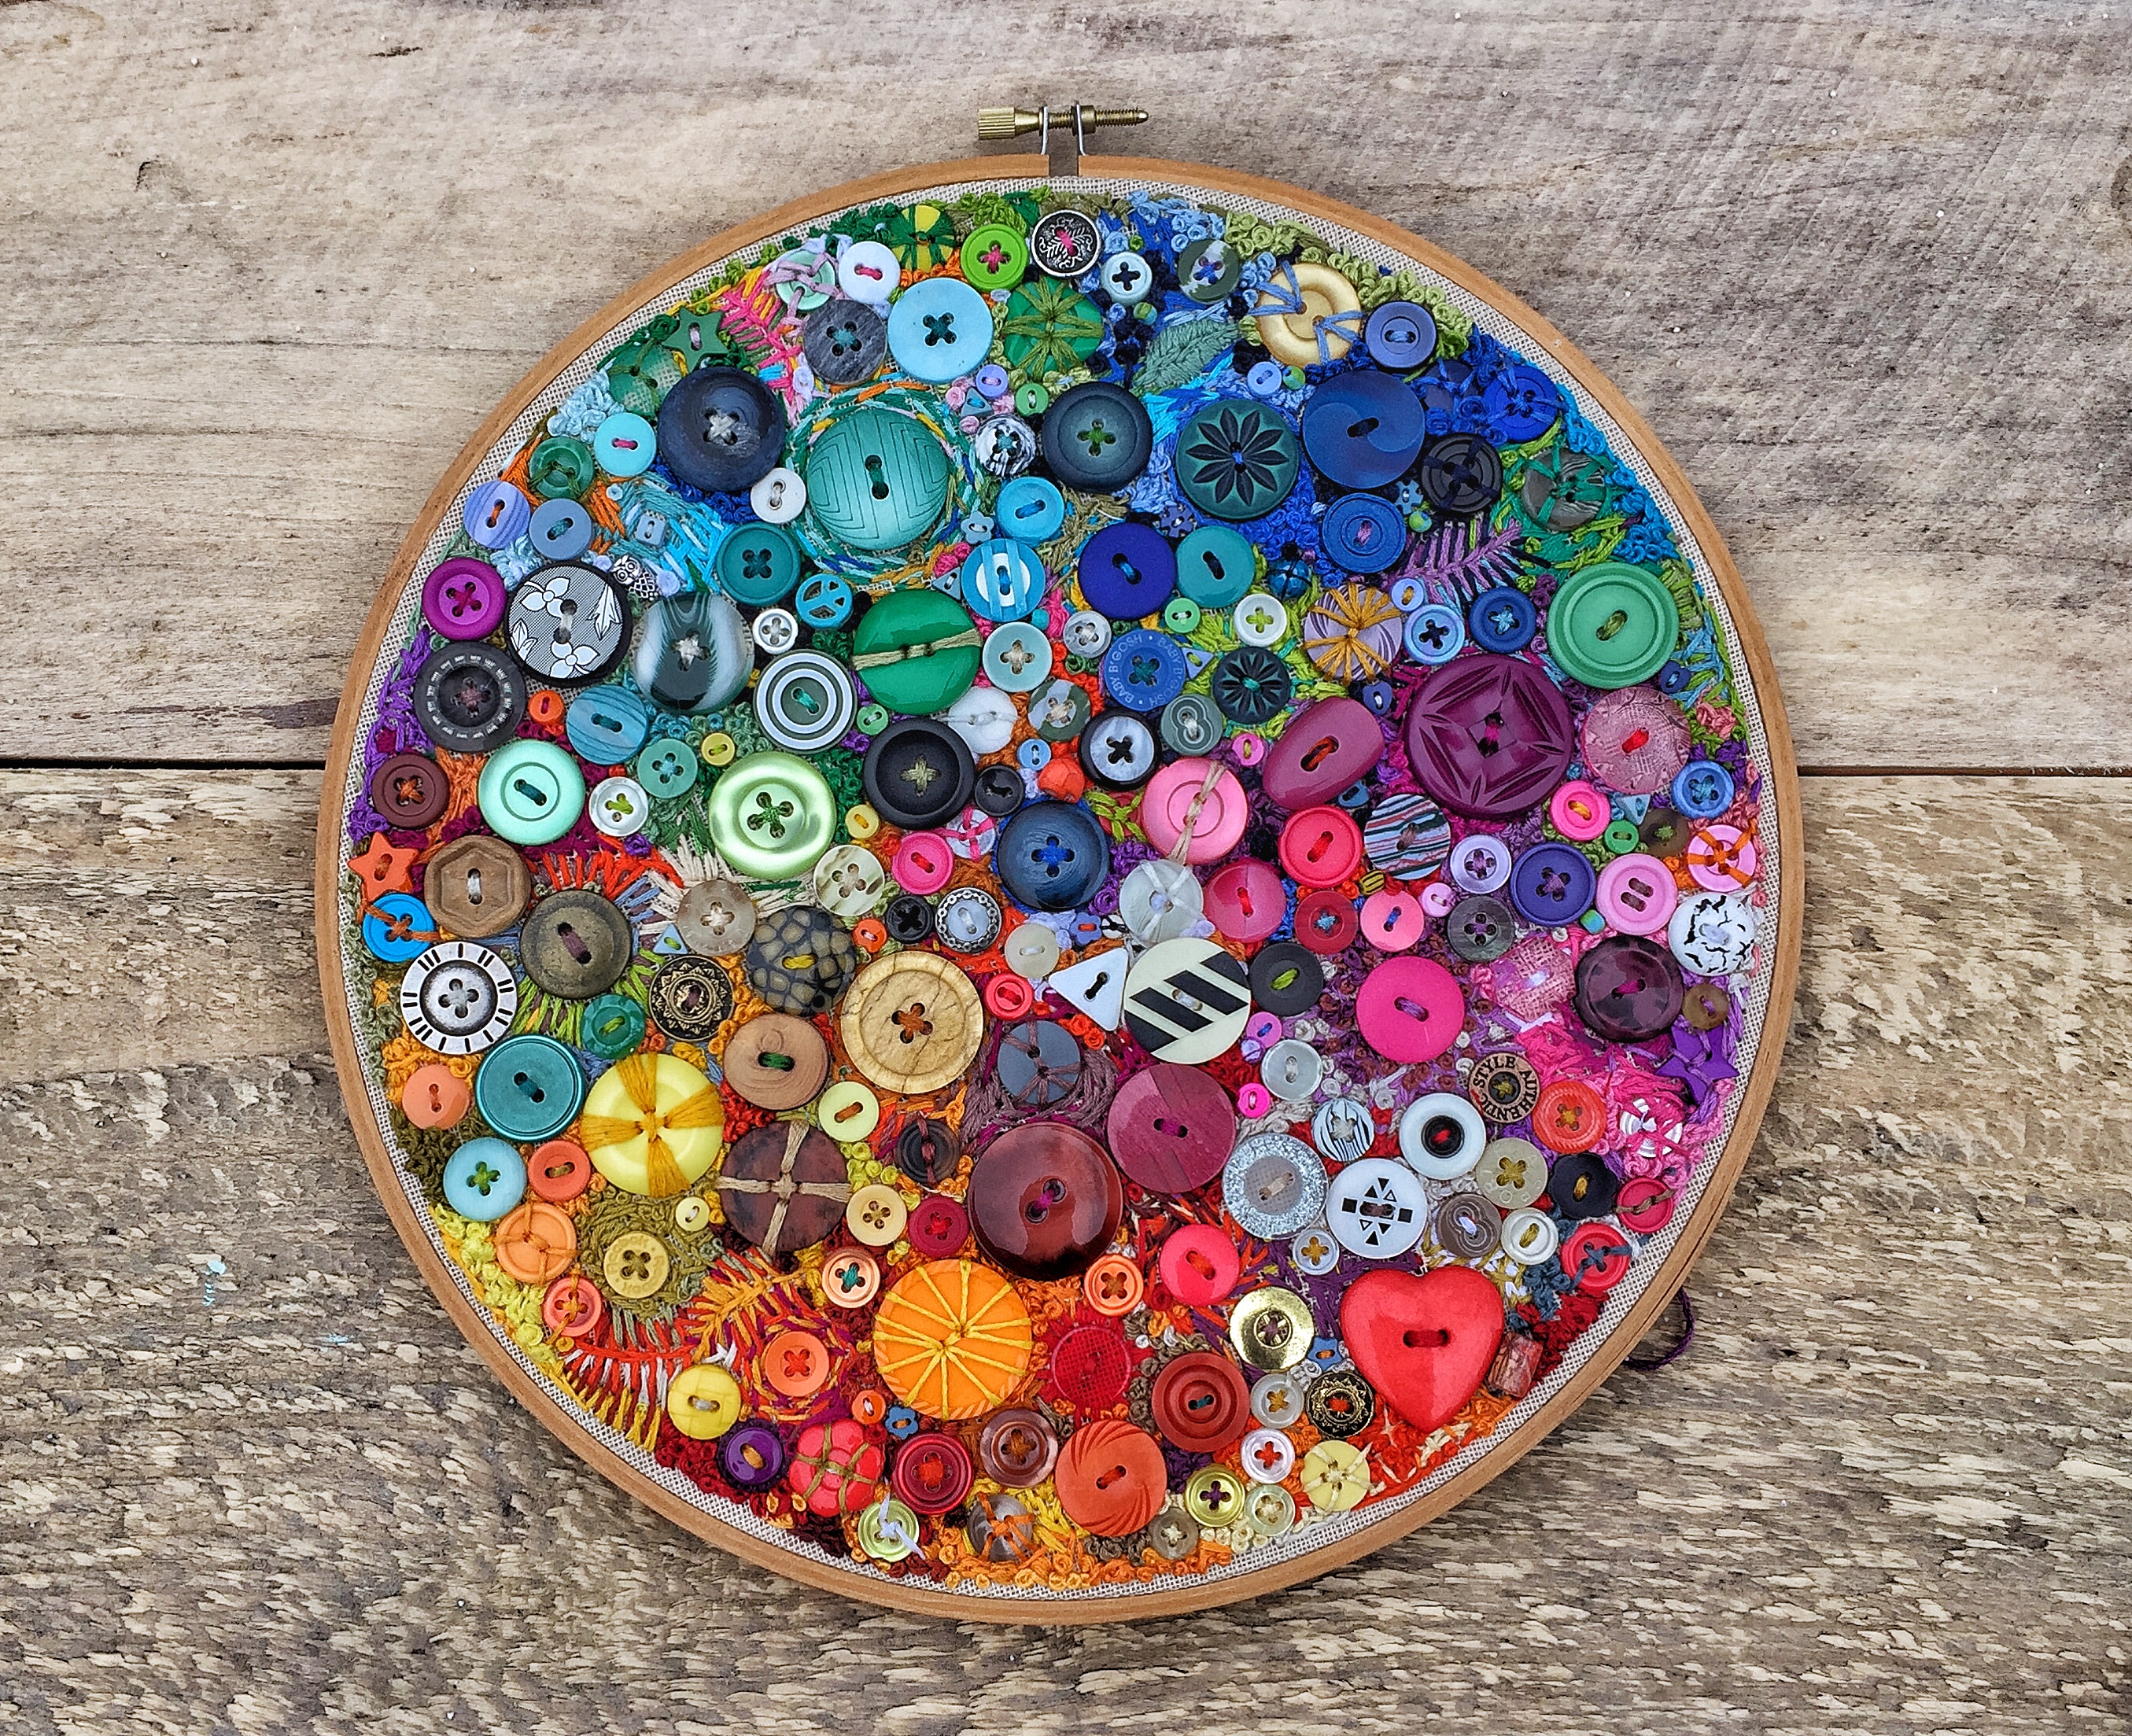 One Year of Stitches and Buttons - Embroidery Hoop 365 Project